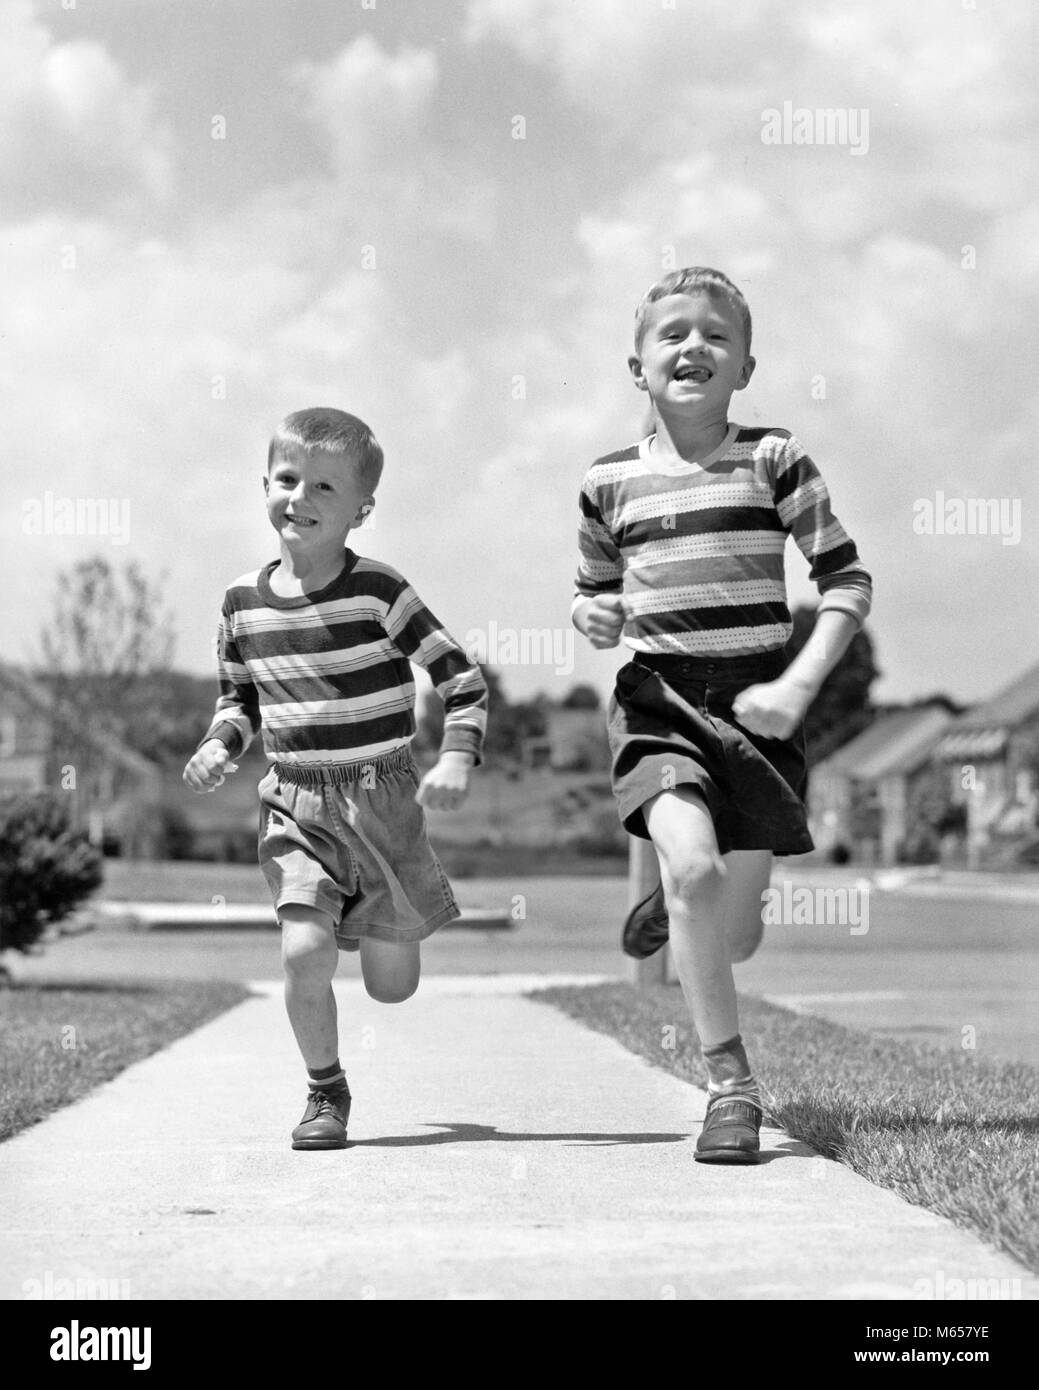 1950s TWO SMILING BOYS BROTHERS WEARING STRIPED SHIRTS SHORTS RUNNING ON SIDEWALK LOOKING AT CAMERA SUBURBAN NEIGHBORHOOD - j1442 HAR001 HARS FULL-LENGTH PHYSICAL FITNESS SIBLINGS NOSTALGIA TOGETHERNESS SUMMERTIME EYE CONTACT 7-9 YEARS FREEDOM 5-6 YEARS HAPPINESS NEIGHBORHOOD CHEERFUL ADVENTURE EXCITEMENT RECREATION SHIRTS GROWTH SIBLING SMILES JOYFUL ESCAPE SHORT PANTS T-SHIRT JUVENILES MALES TEE SHIRT B&W BLACK AND WHITE CAUCASIAN ETHNICITY LOOKING AT CAMERA OLD FASHIONED Stock Photo